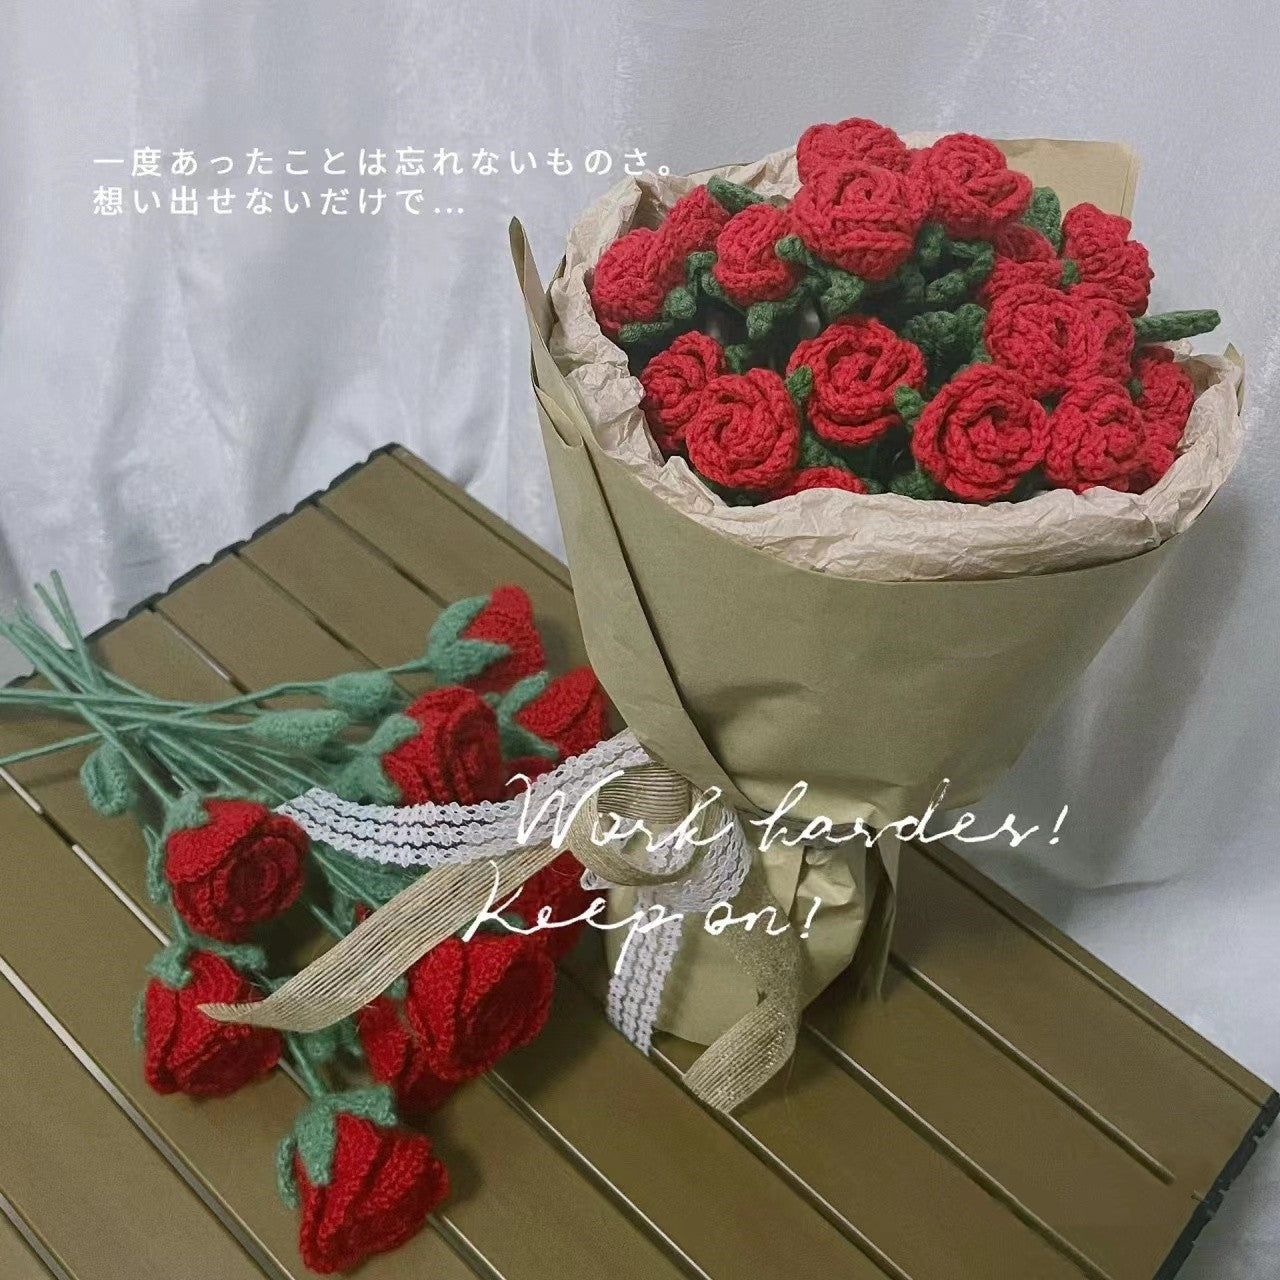 AA Handmade Multi-Head Rose Bouquet with Crochet Yarn Material for Valentine's Day, Gift for Girlfriend